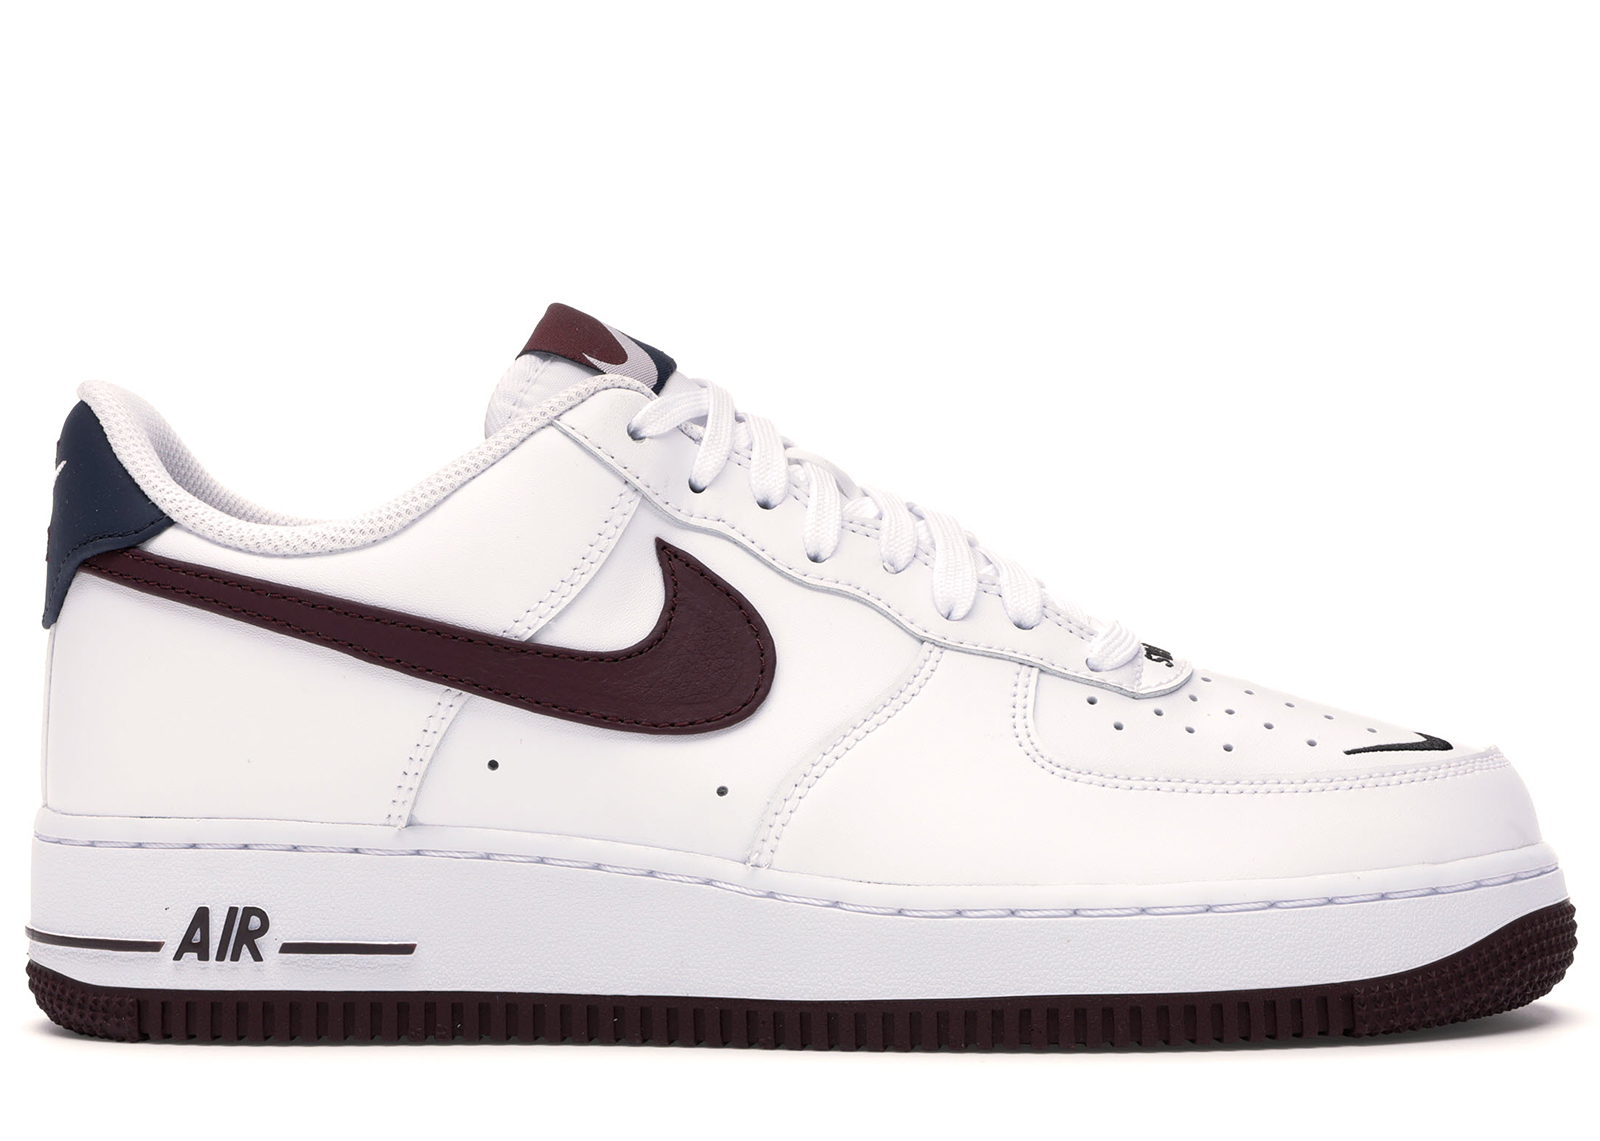 Nike Air Force 1 Low Obsidian/White 